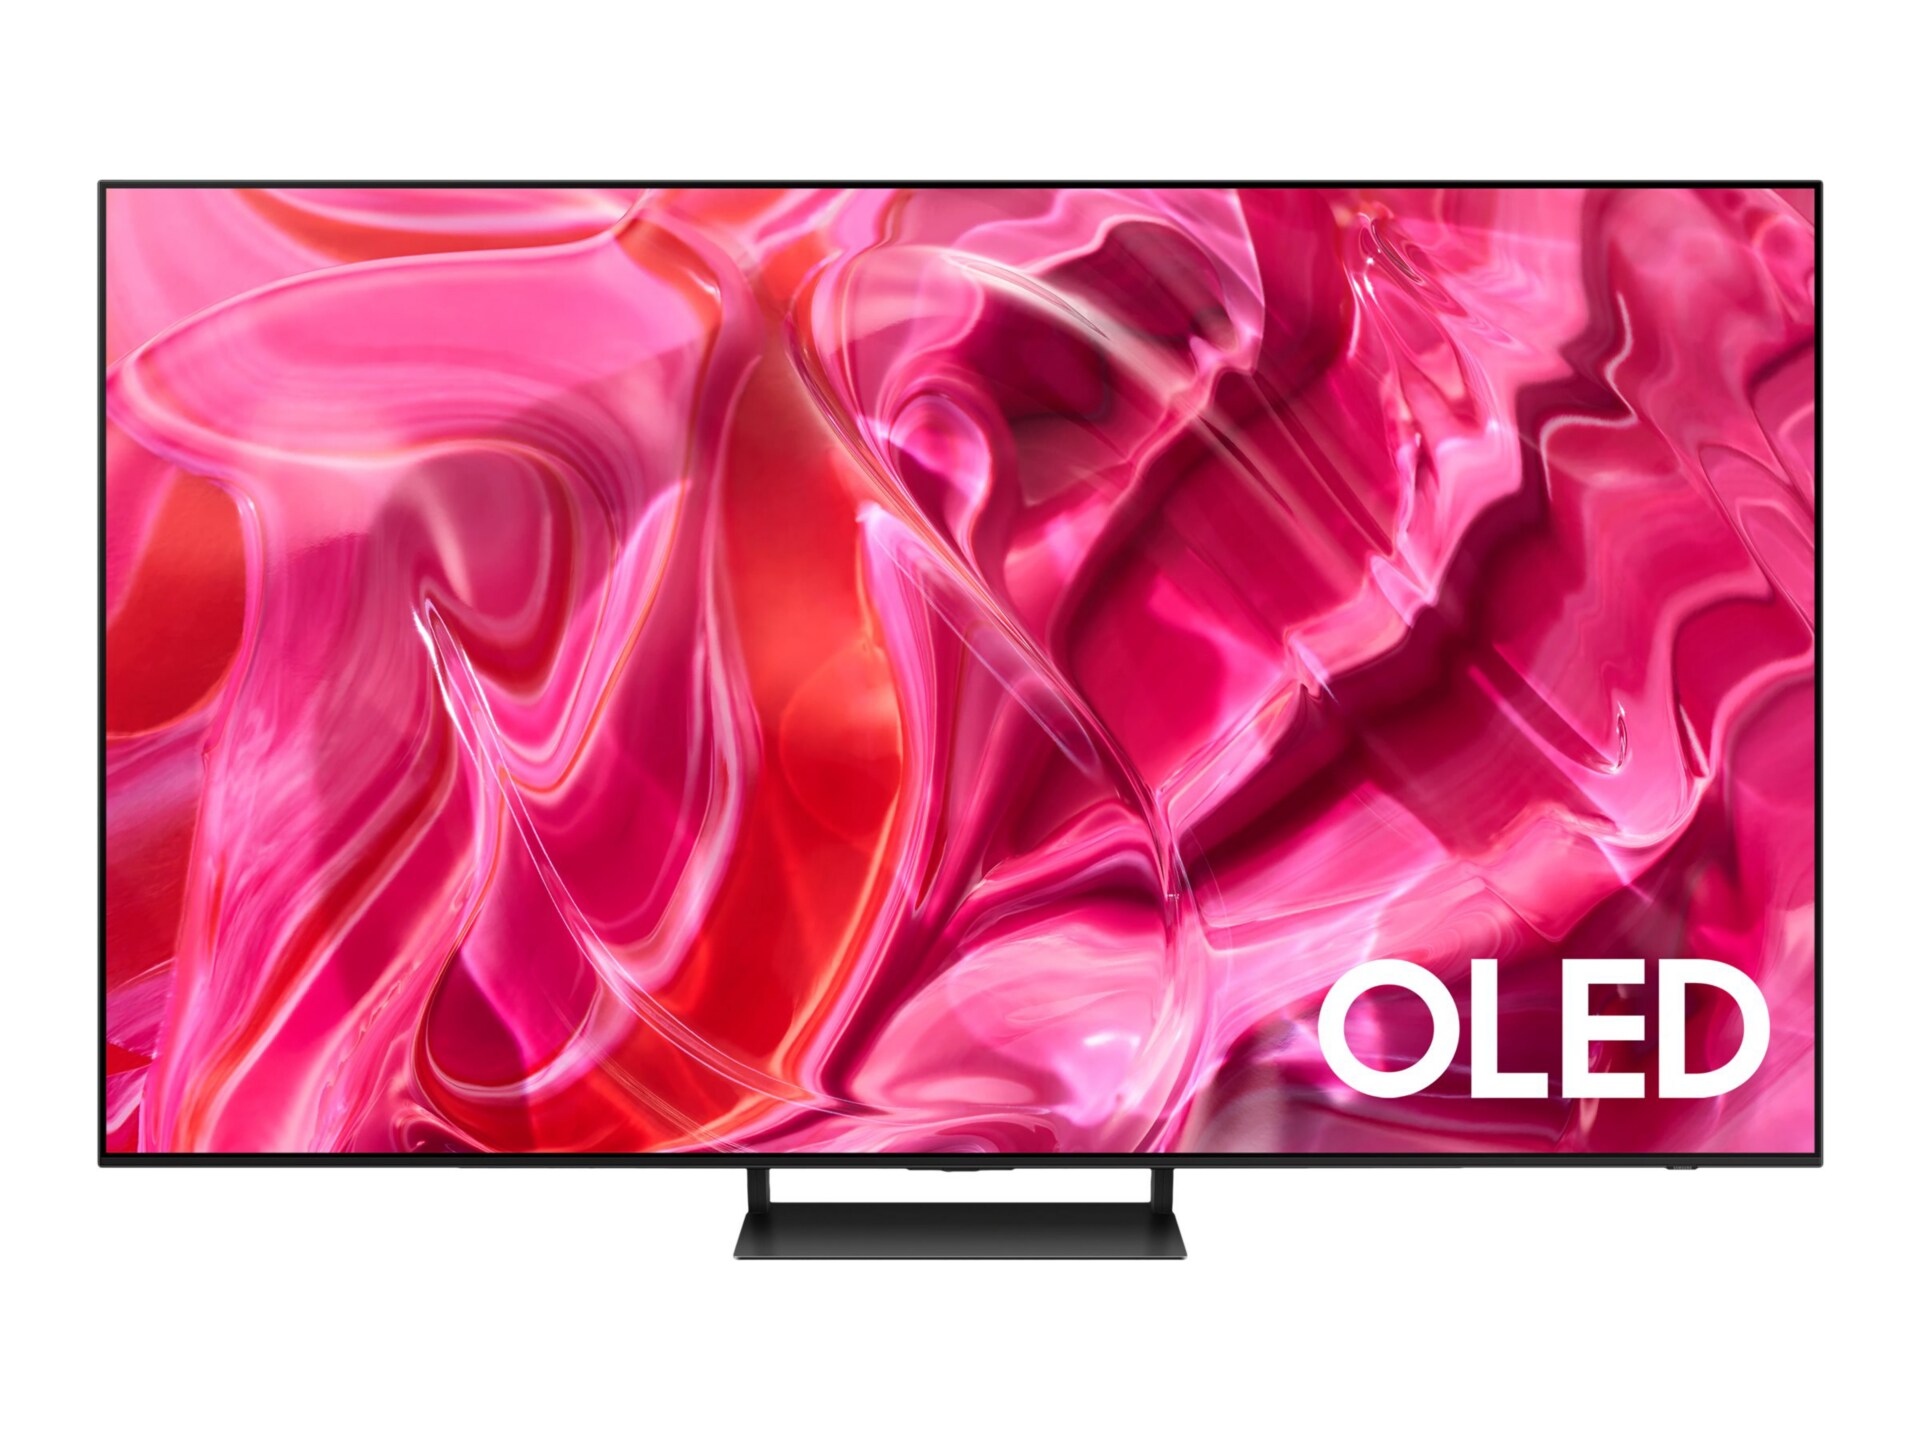 Telly dual-screen 55” 4K HDR smart TV has an AI-integrated smart screen